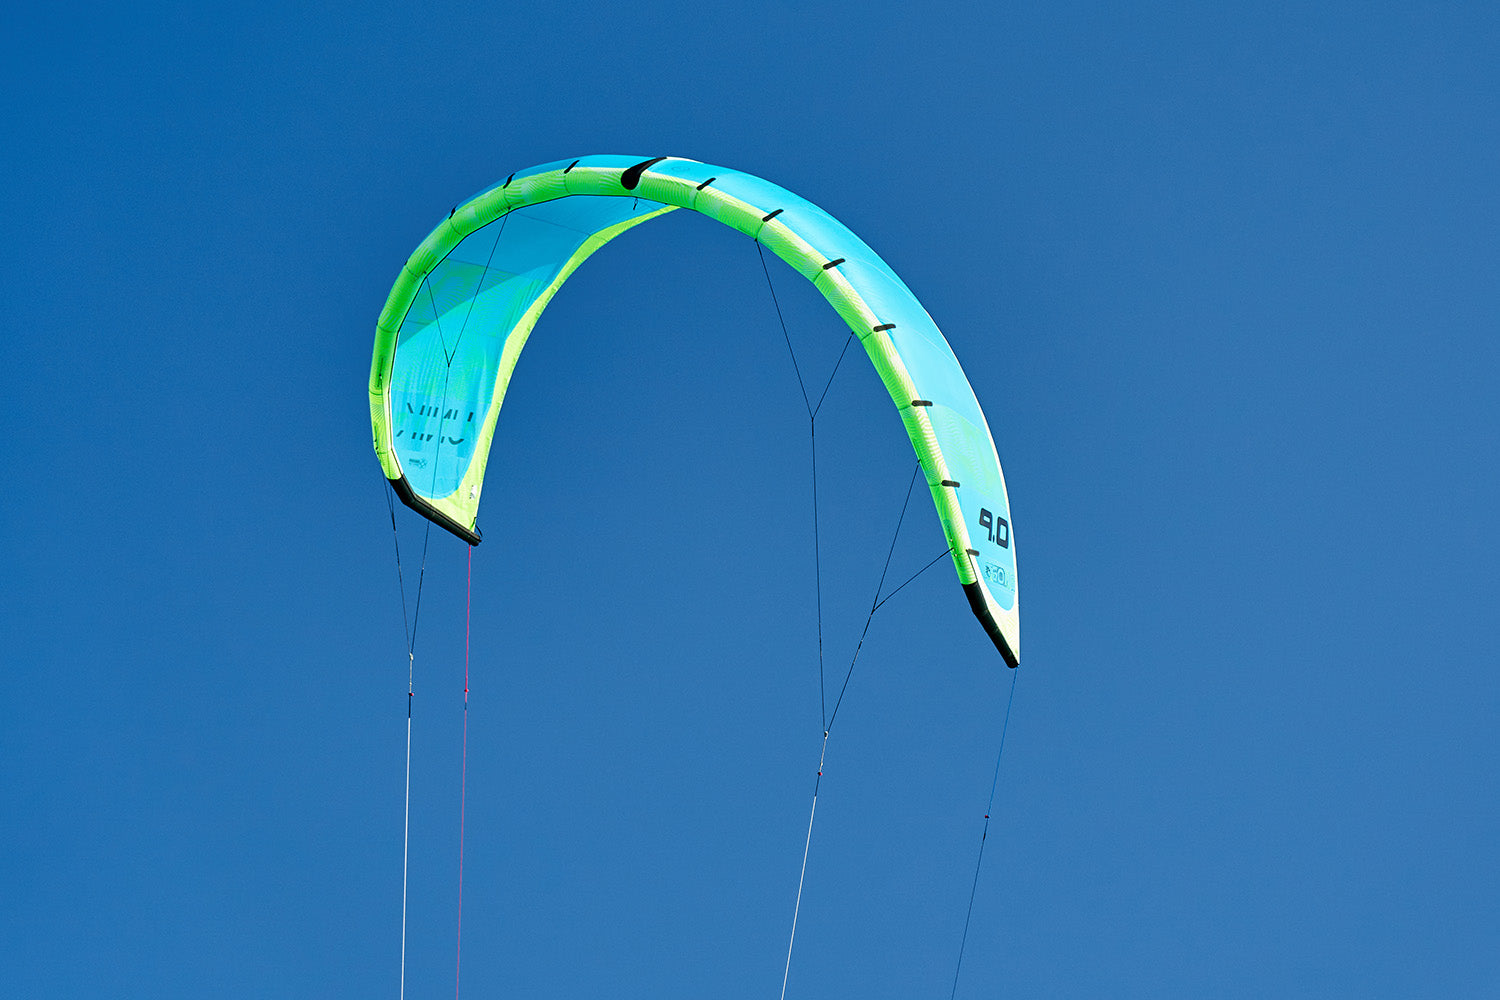 SHOP: 30% REDUCTION ON 2020 GONG KITE !!!